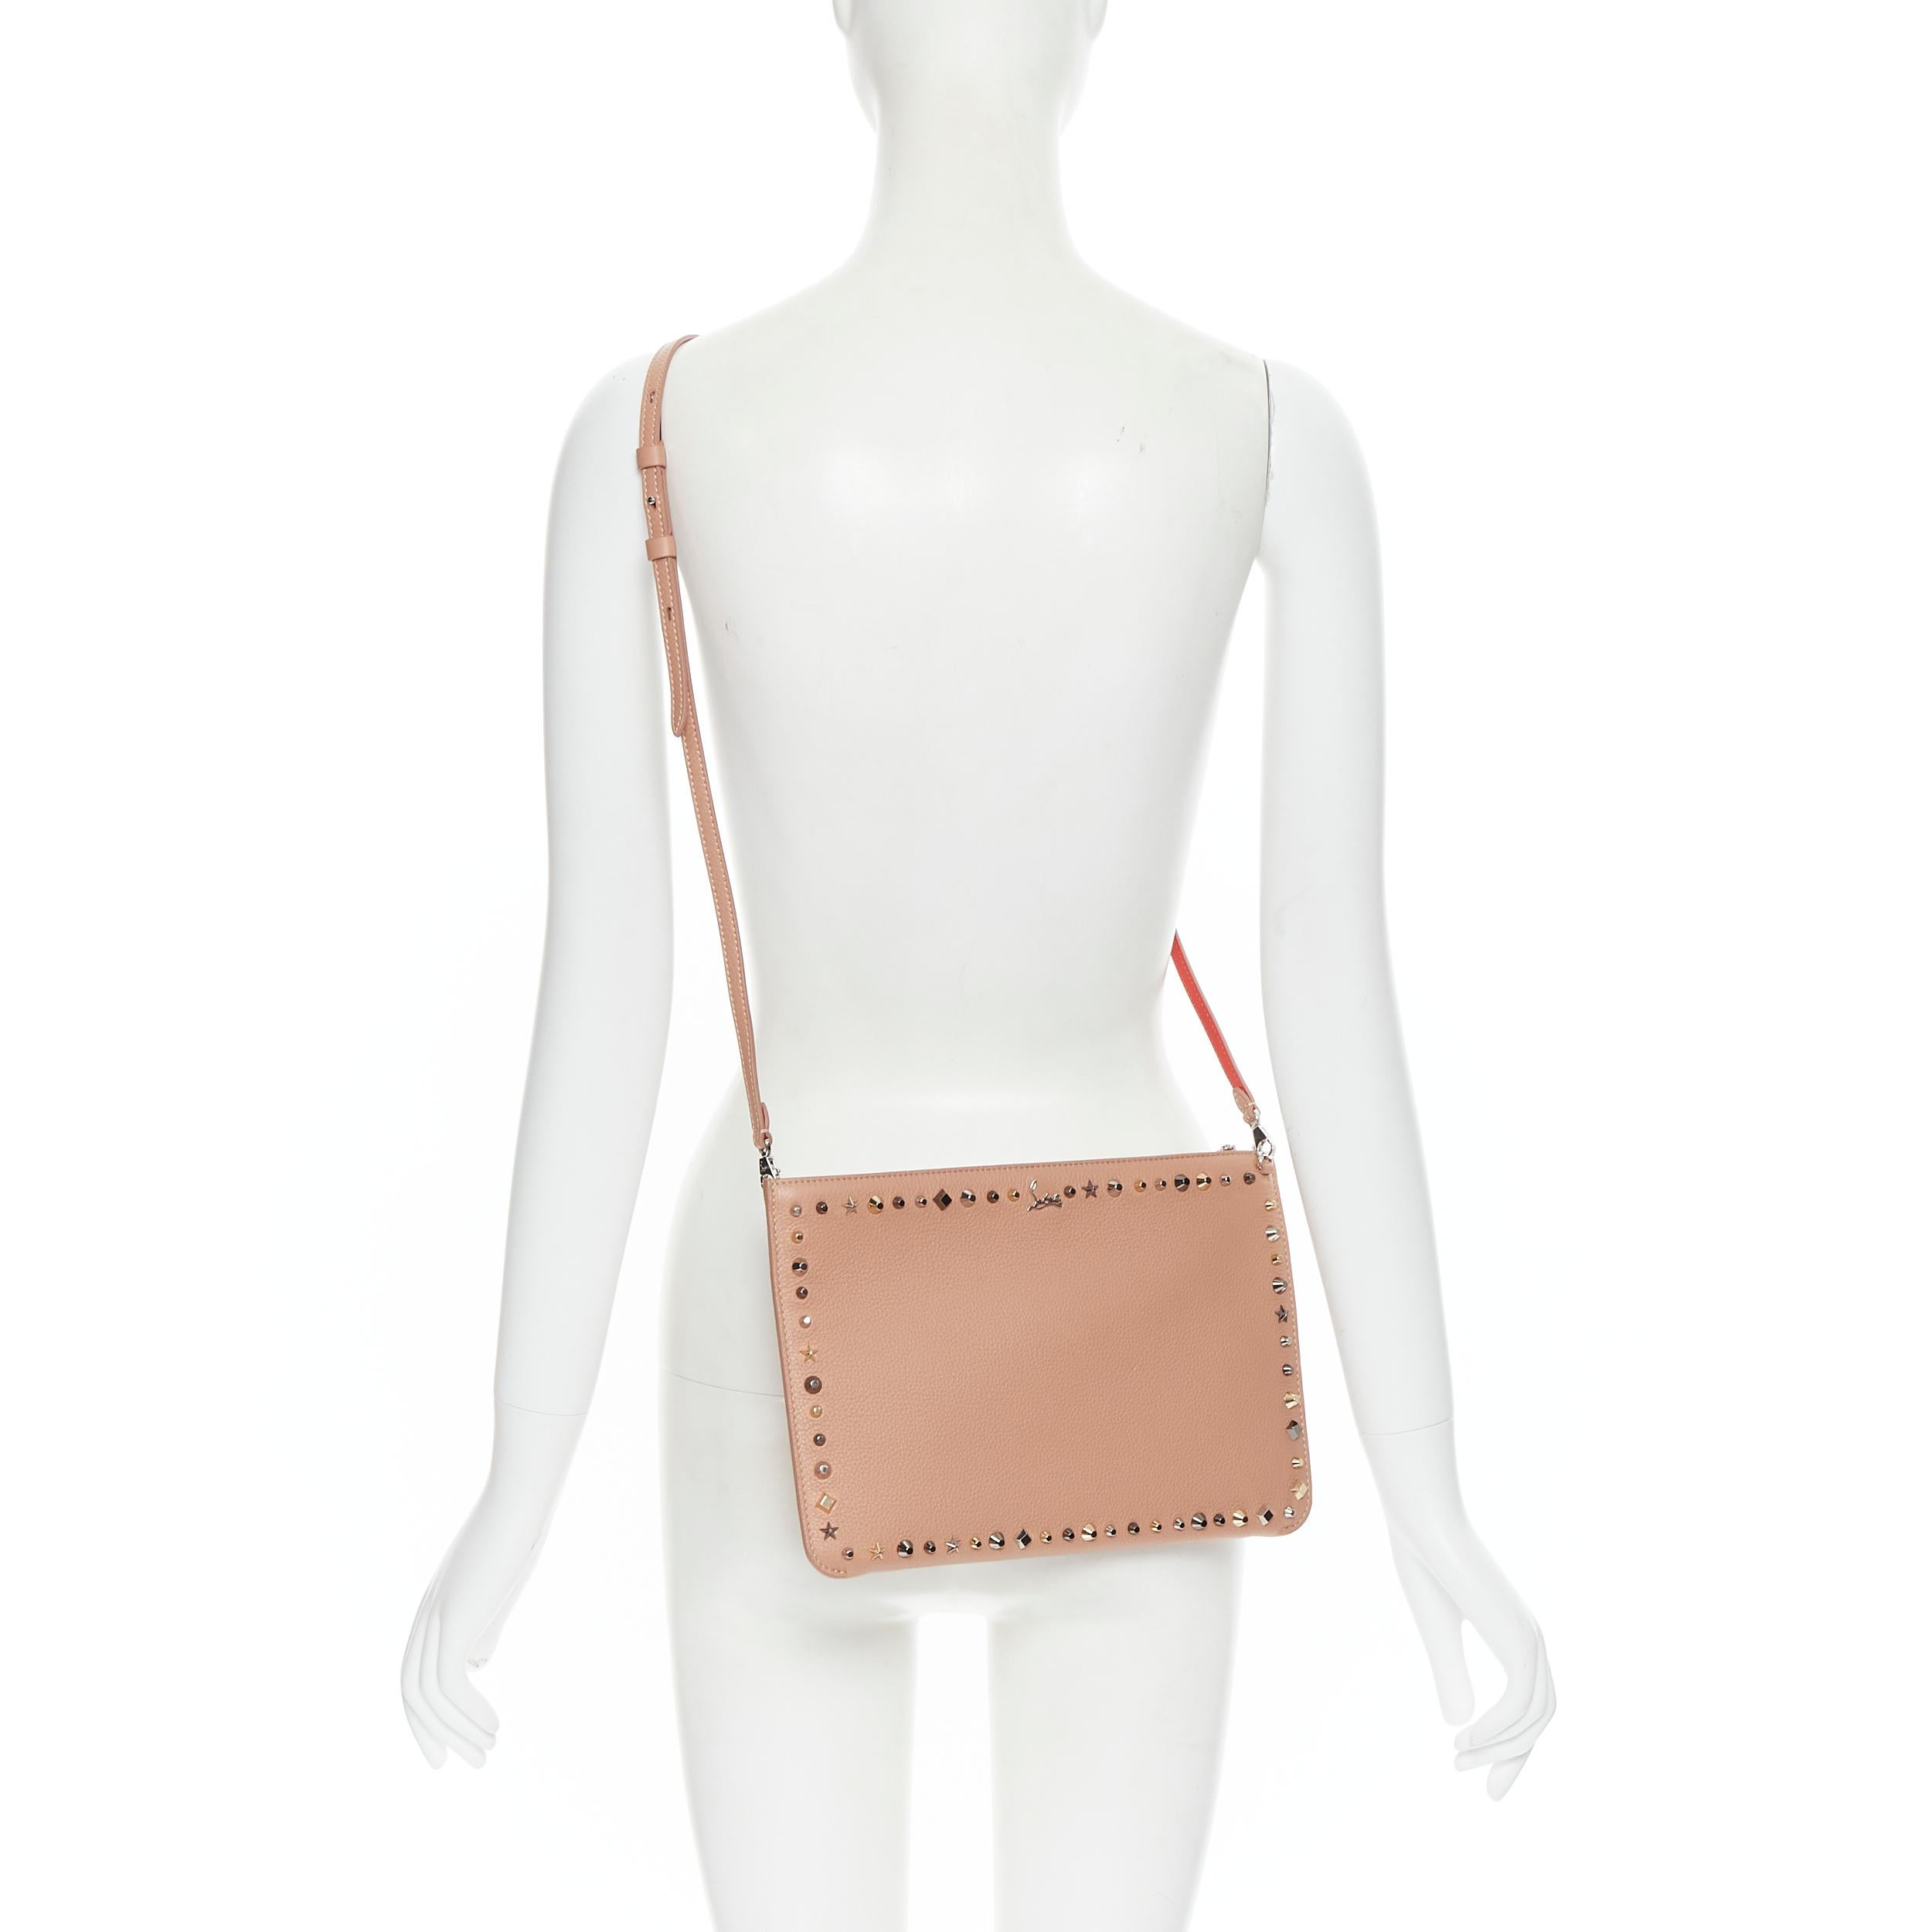 CHRISTIAN LOUBOUTIN Loubiclutch Trashmix Spike nude leather shoulder bag clutch 
Reference: TGAS/B00659 
Brand: Christian Louboutin 
Designer: Christian Louboutin 
Model: Loubiclutch Trashmix Spike 
Material: Leather 
Color: Beige 
Pattern: Solid